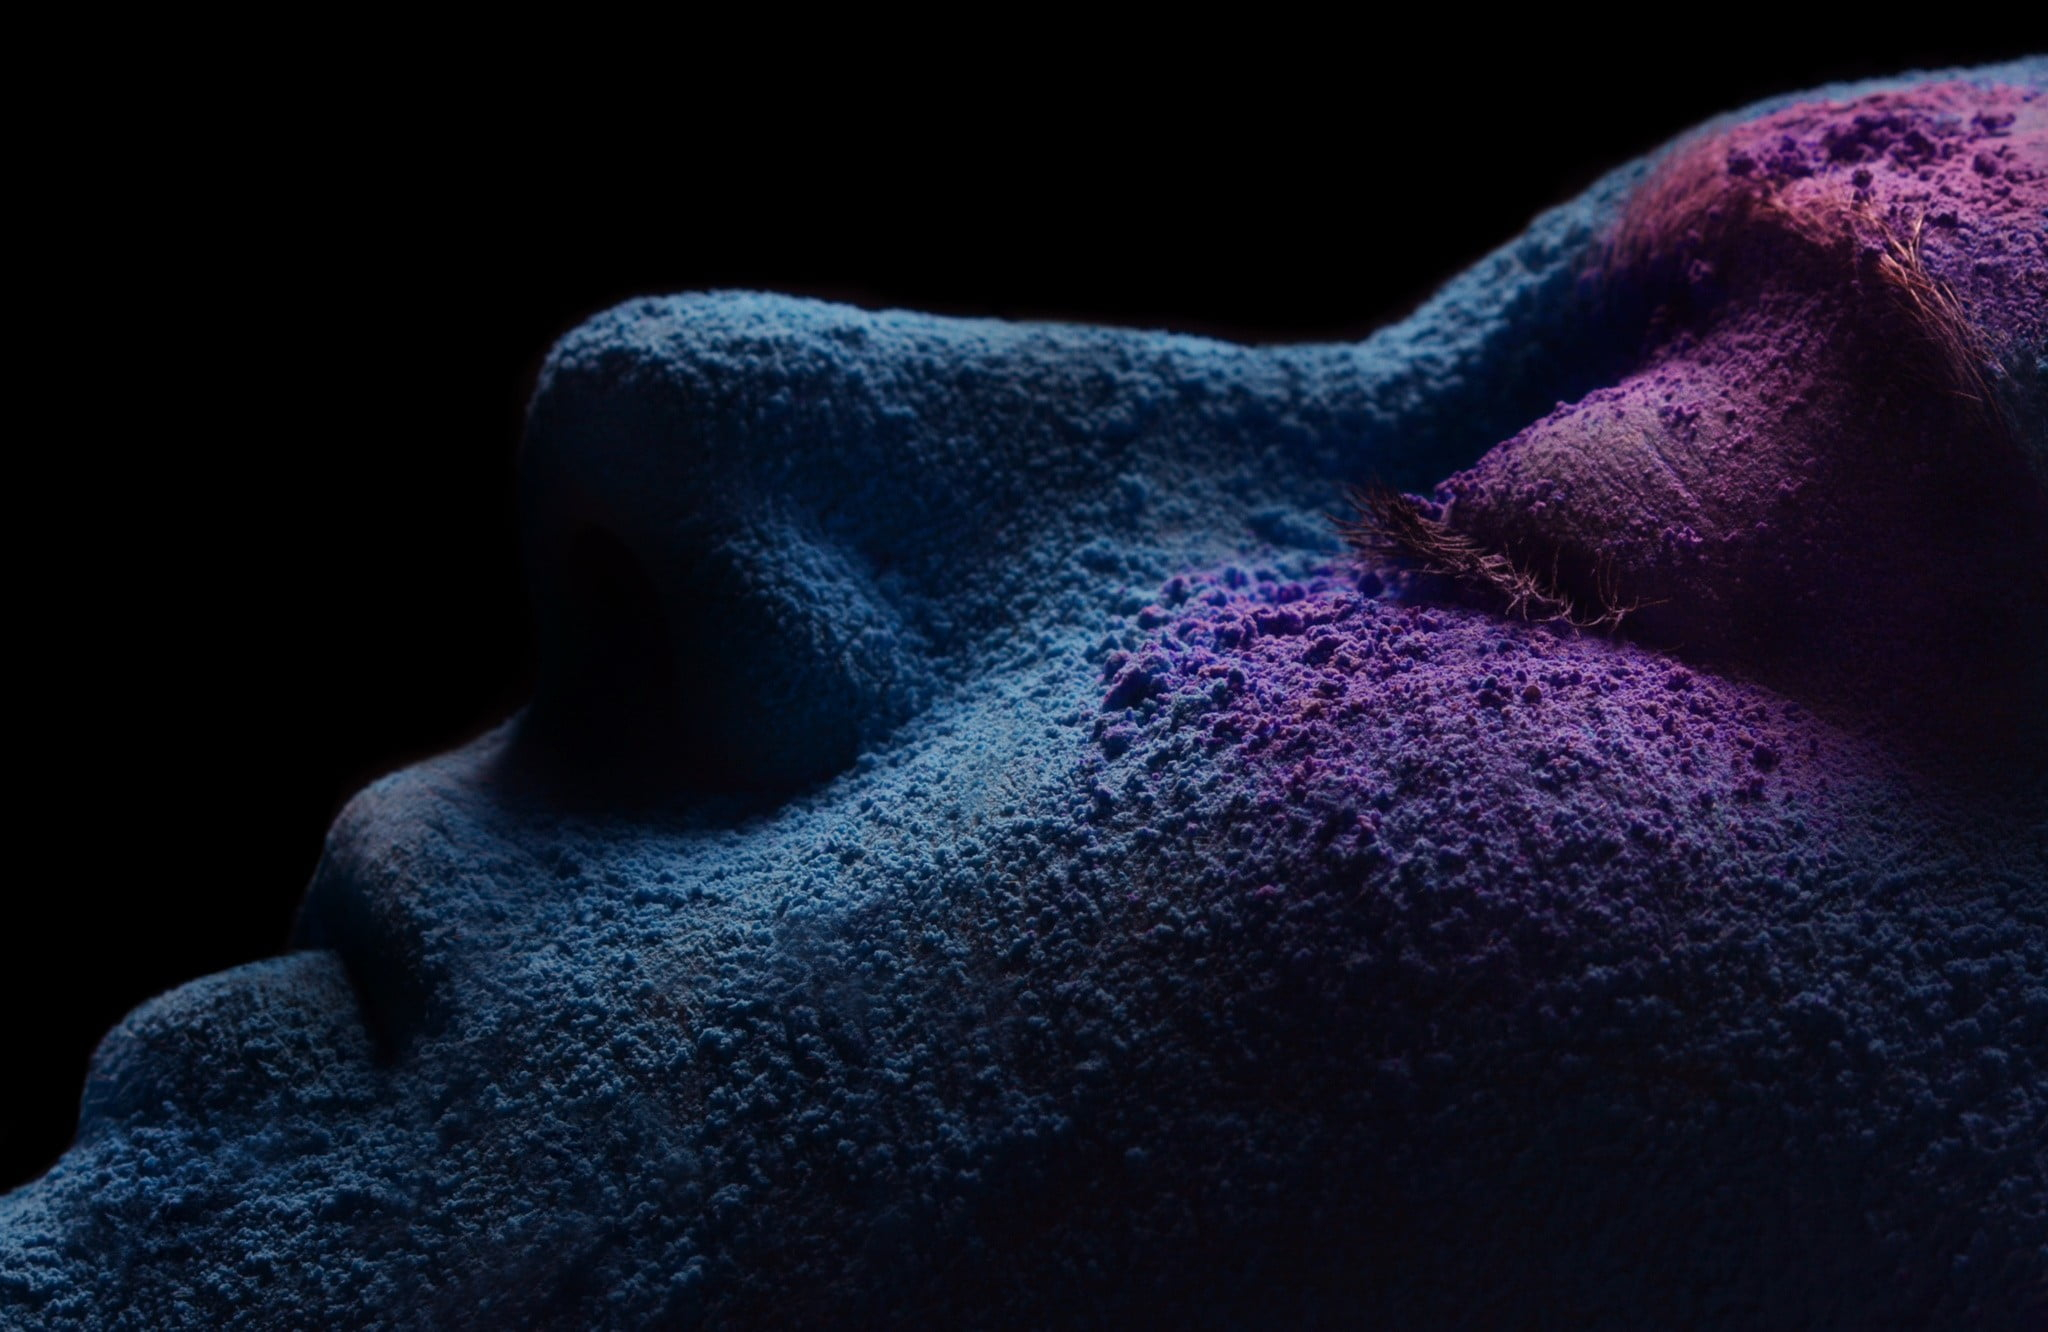 Wallpaper person face, person's face with blue and purple powder in dark room